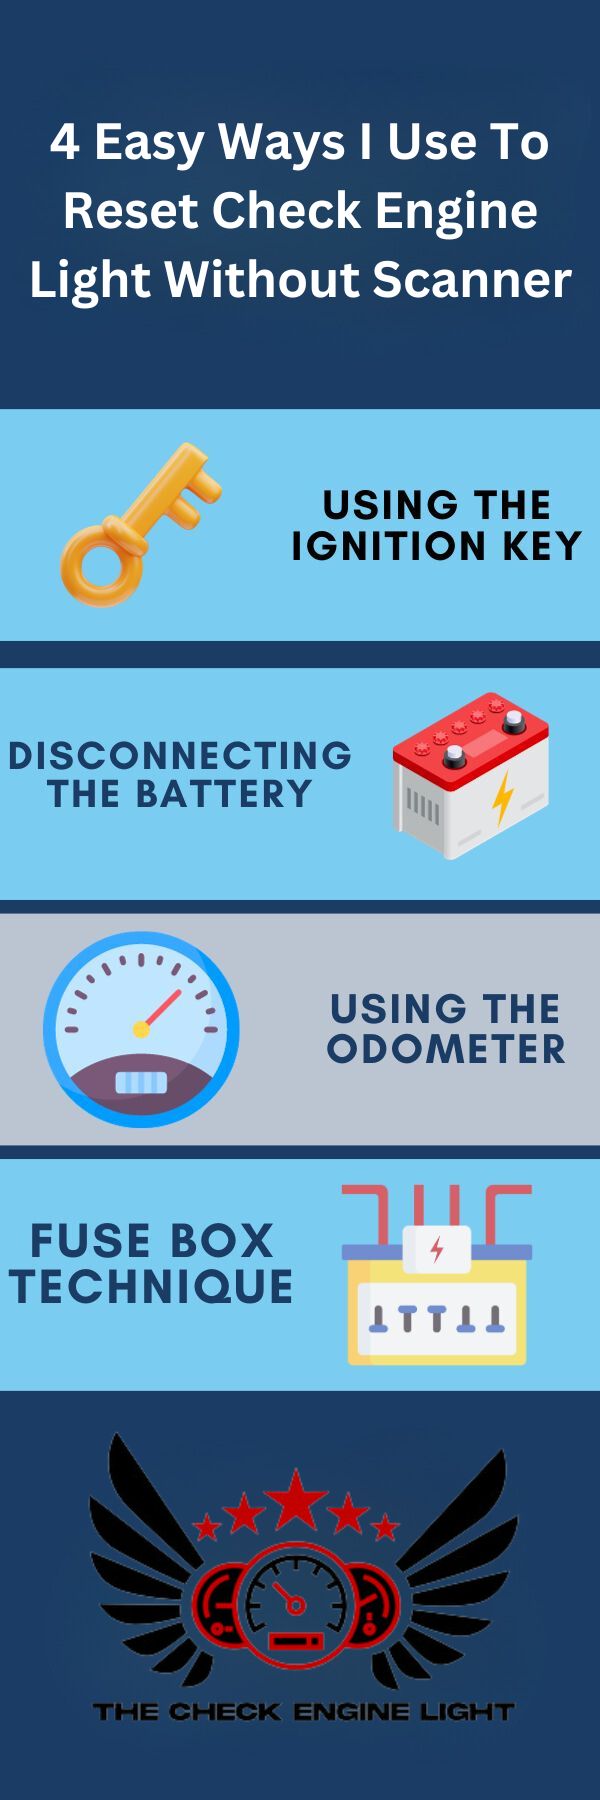 infographic about 4 Easy Ways I Use To Reset Check Engine Light Without Scanner